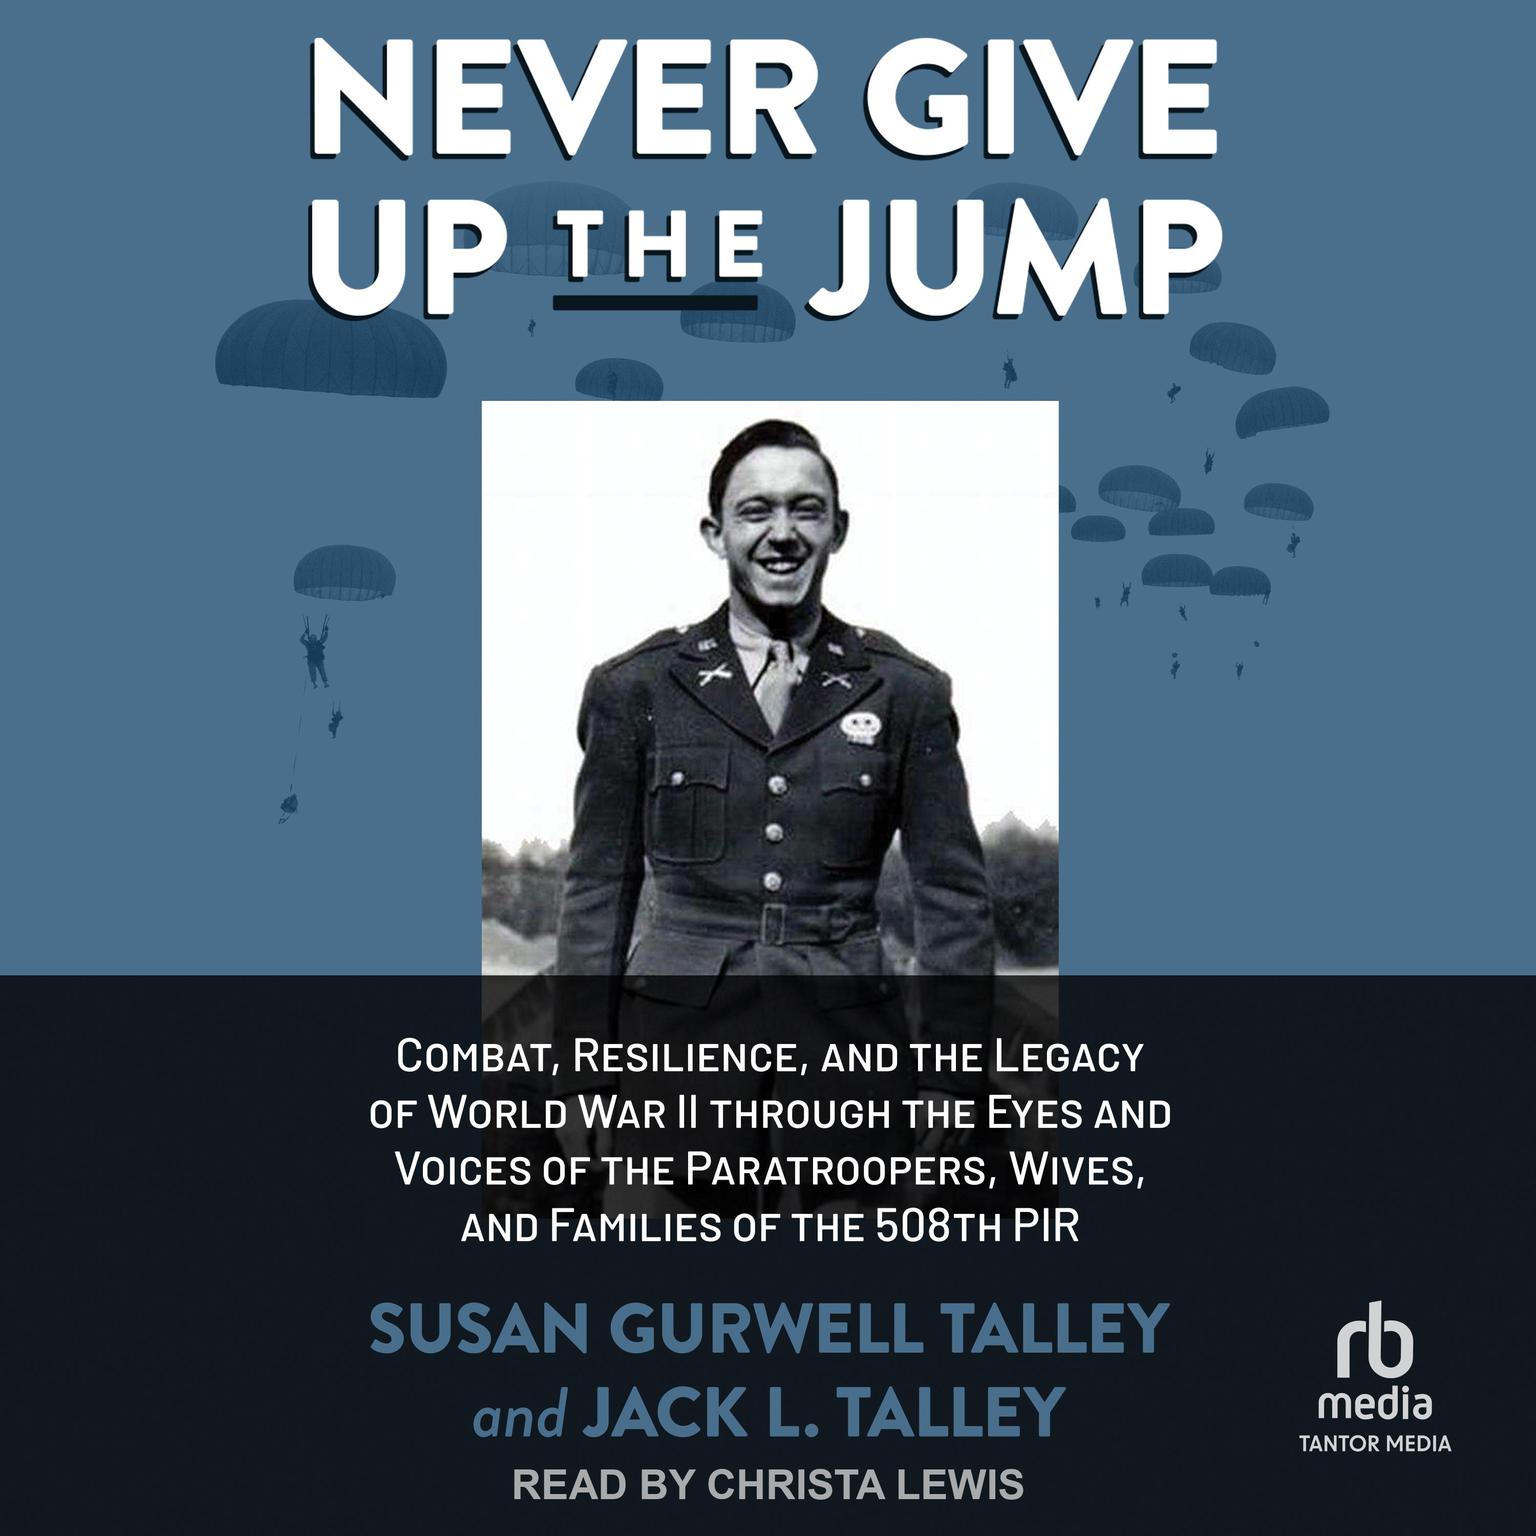 Never Give Up the Jump: Combat, Resilience, and the Legacy of World War II through the Eyes and Voices of the Paratroopers, Wives, and Families of the 508th PIR Audiobook, by Jack L. Talley